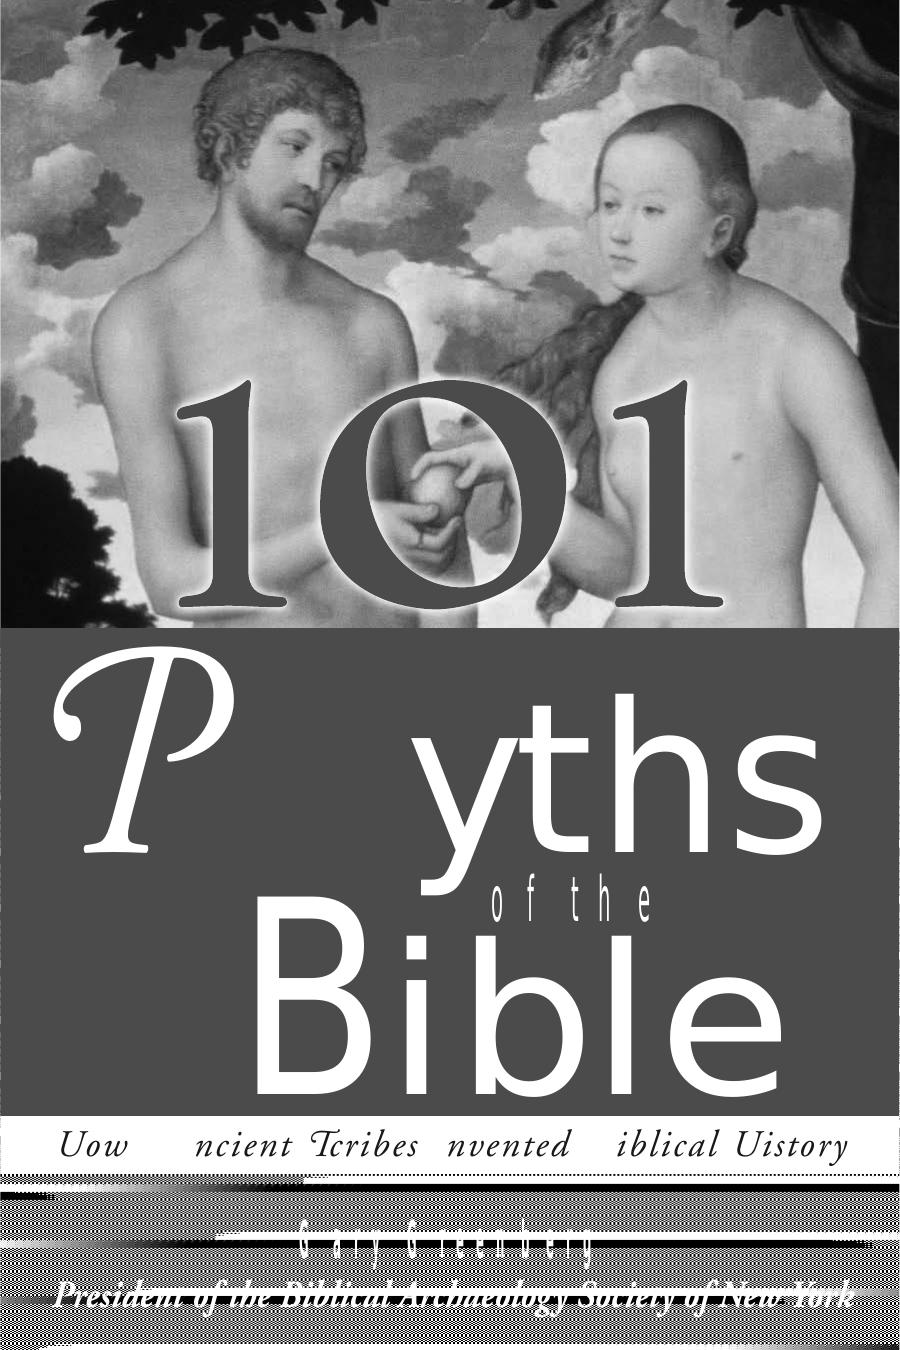 101 Myths of the Bible by Gary Greenberg